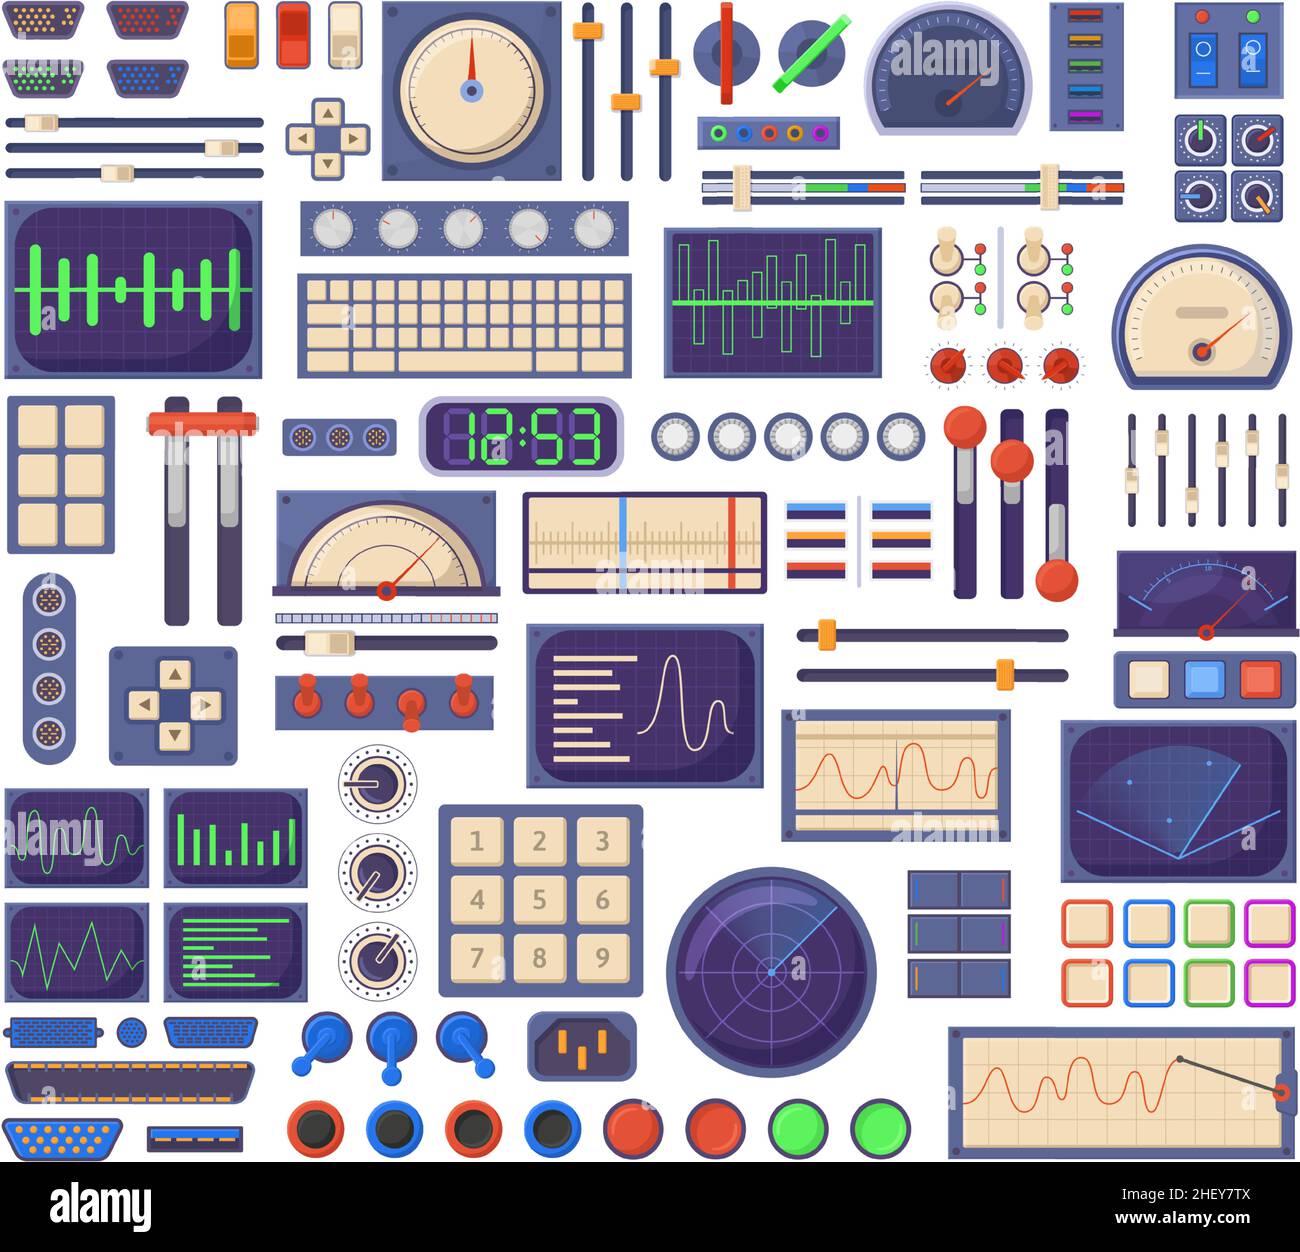 Control panel elements, buttons dials, tuners and connection ports. Retro control panel interface elements vector illustration set. Electronic Stock Vector